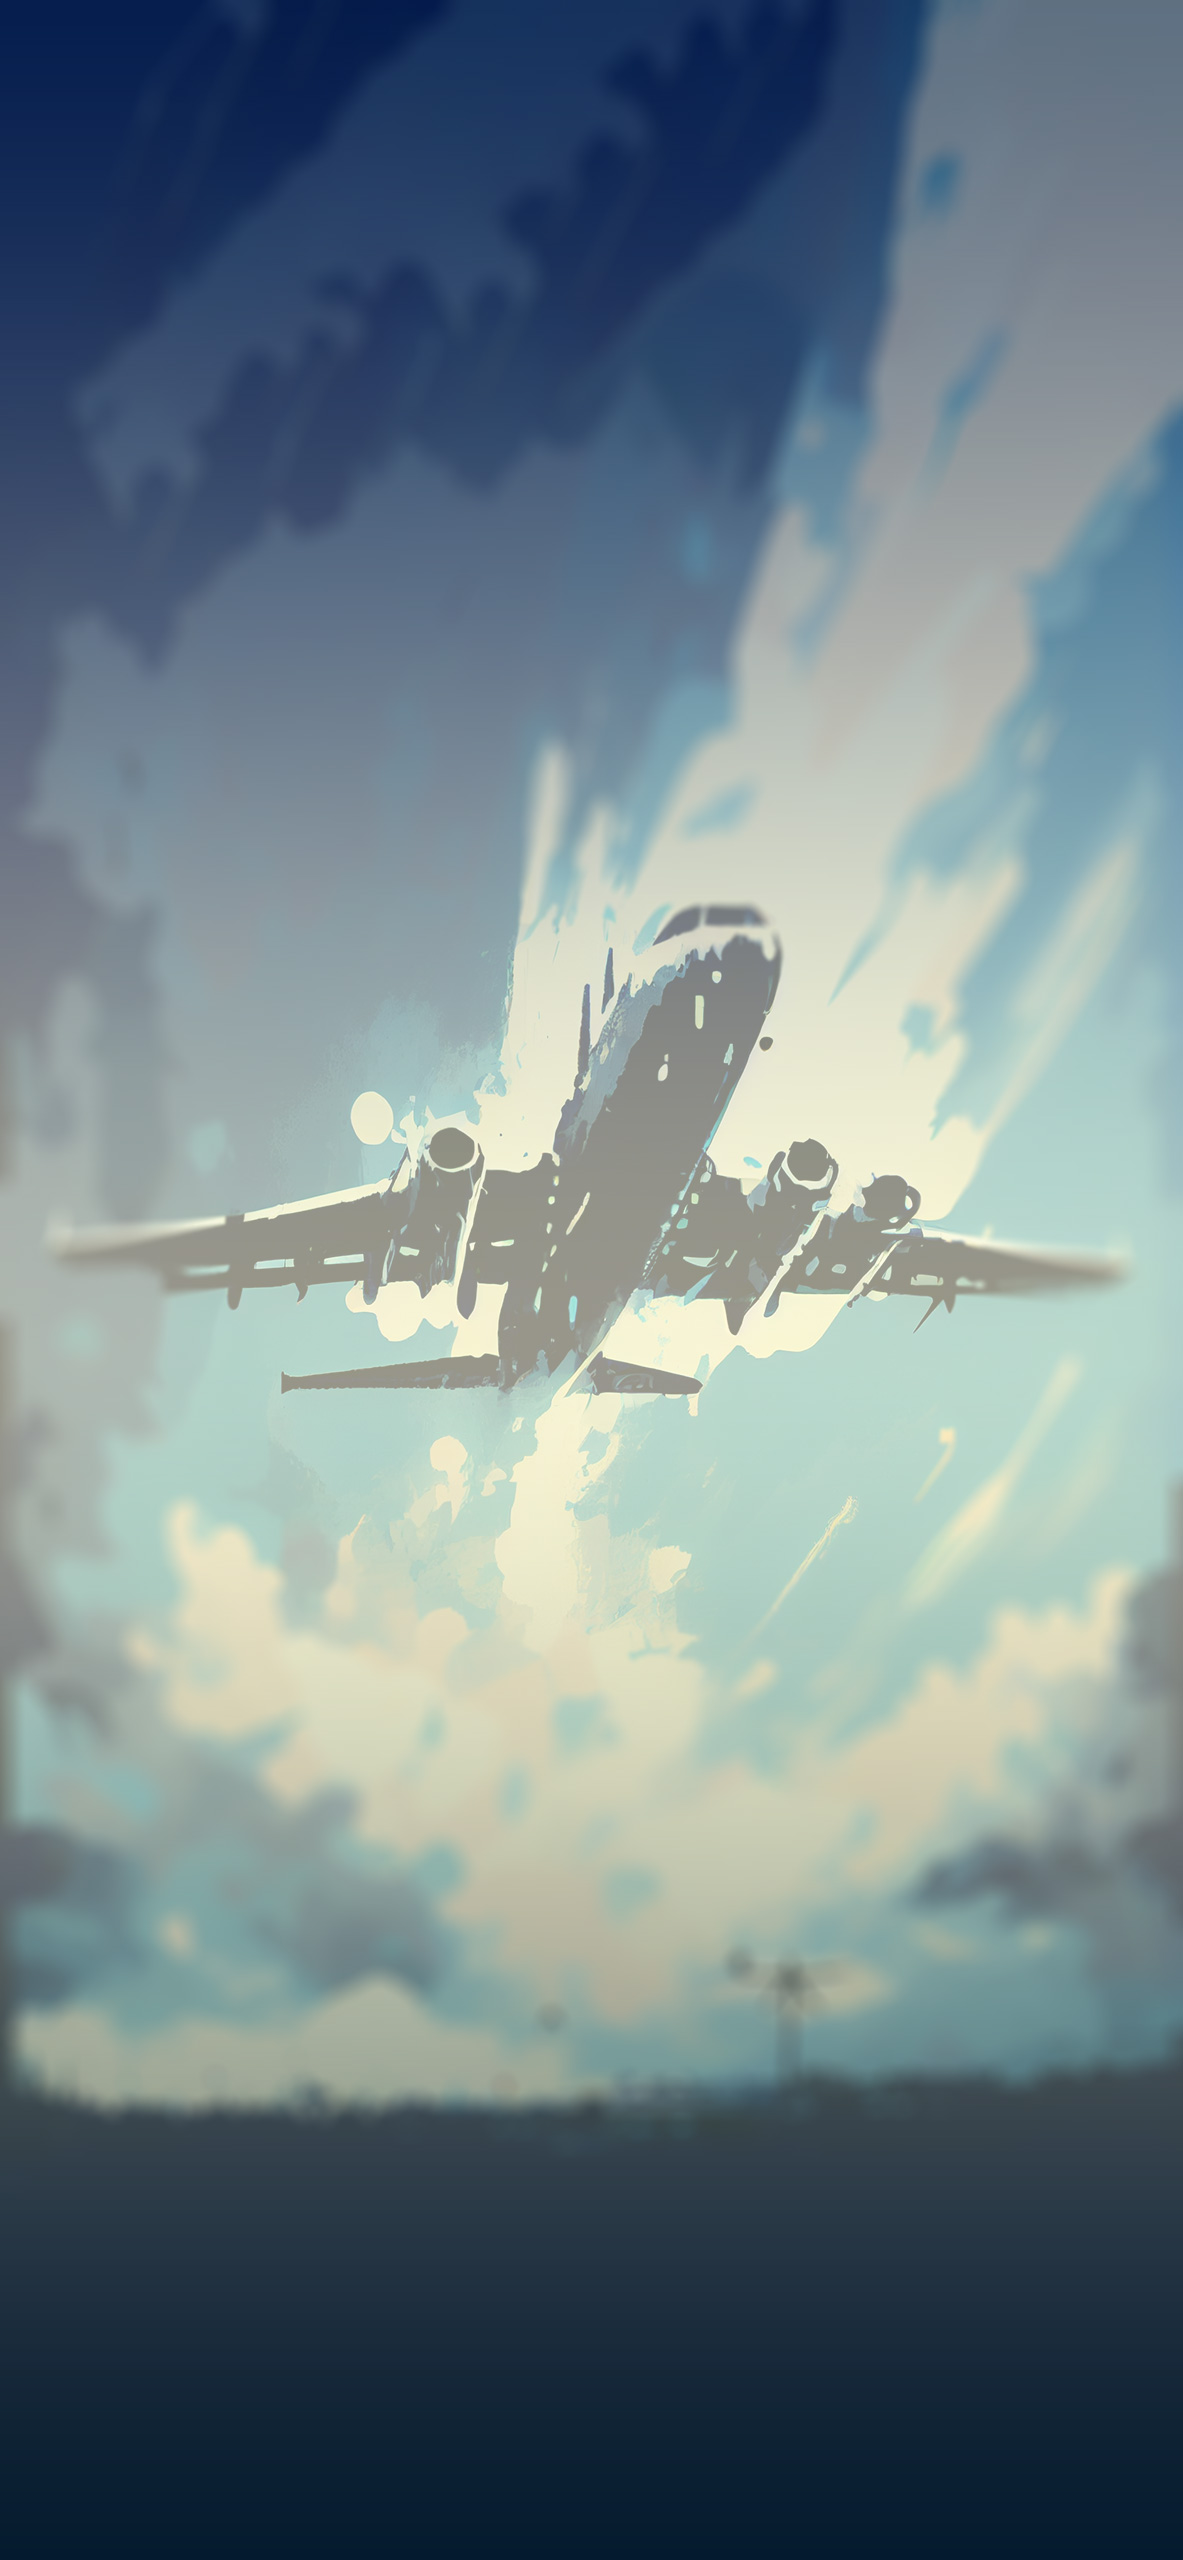 airplane in sky art background